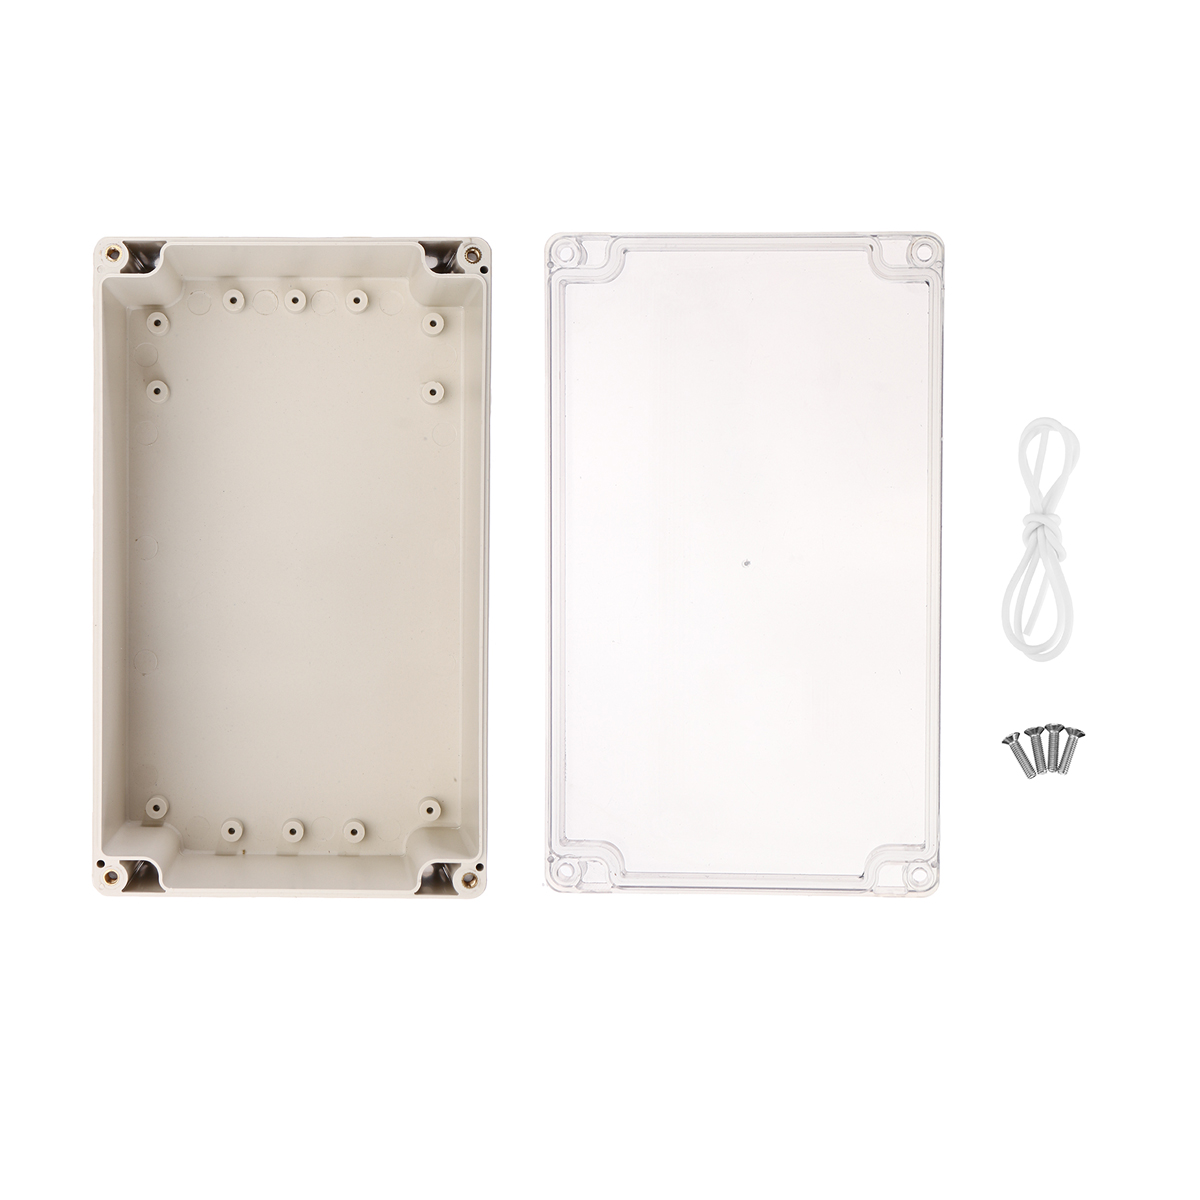 Find Plastic Waterproof Electronic Project Box Clear Cover Electronic Project Case 200 120 75mm for Sale on Gipsybee.com with cryptocurrencies